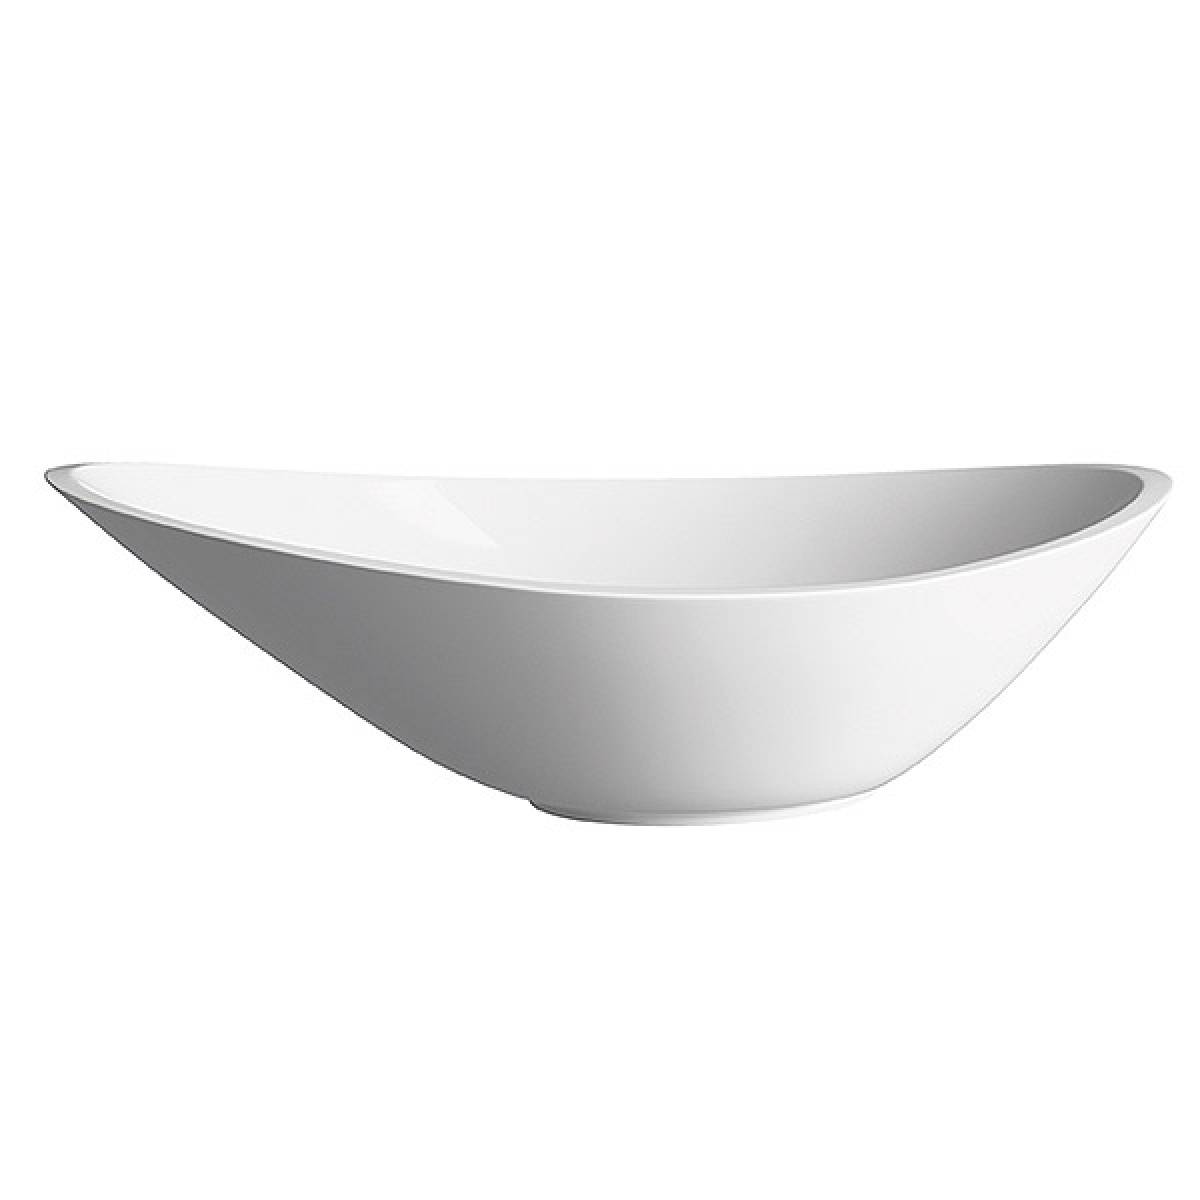 Moods Bathrooms to Love Elemi Counter Top Basin (1343)